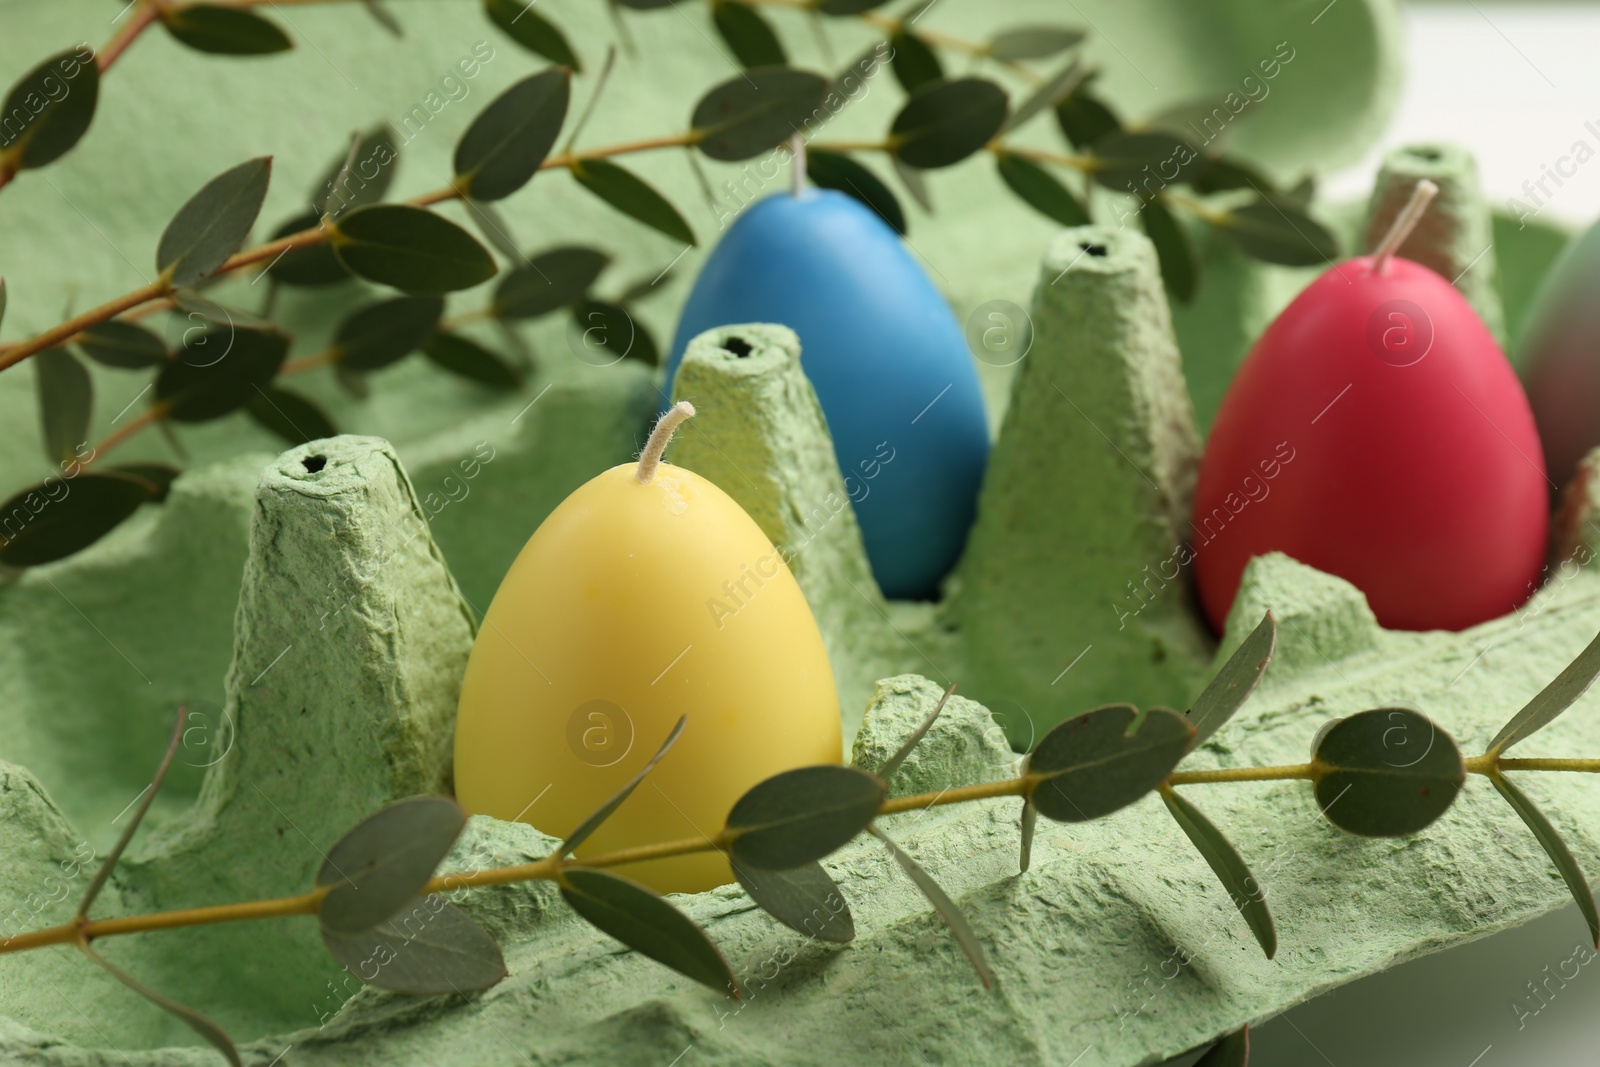 Photo of Colorful egg shaped candles in carton and leaves on table, closeup. Easter decor